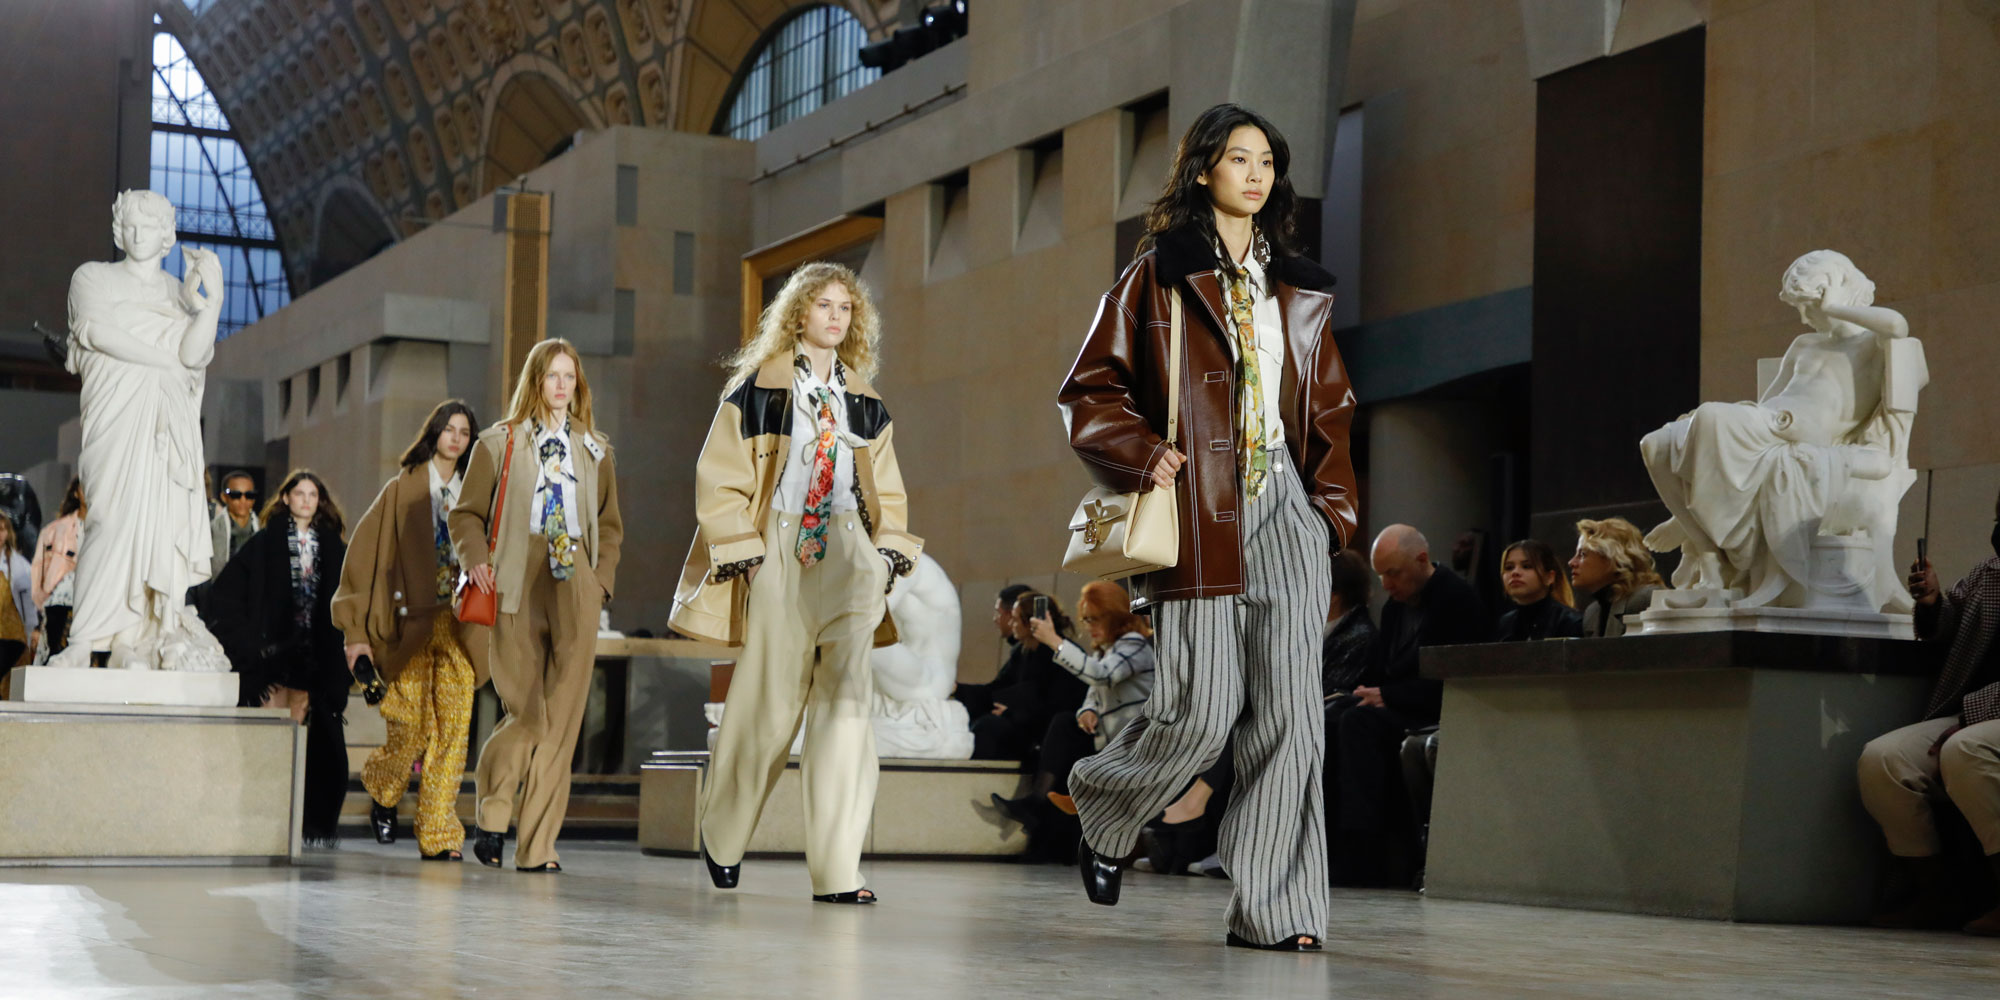 Squid Game' Star Jung Ho-Yeon Opens Louis Vuitton's 2022 Fall/Winter Show -  Magnifissance